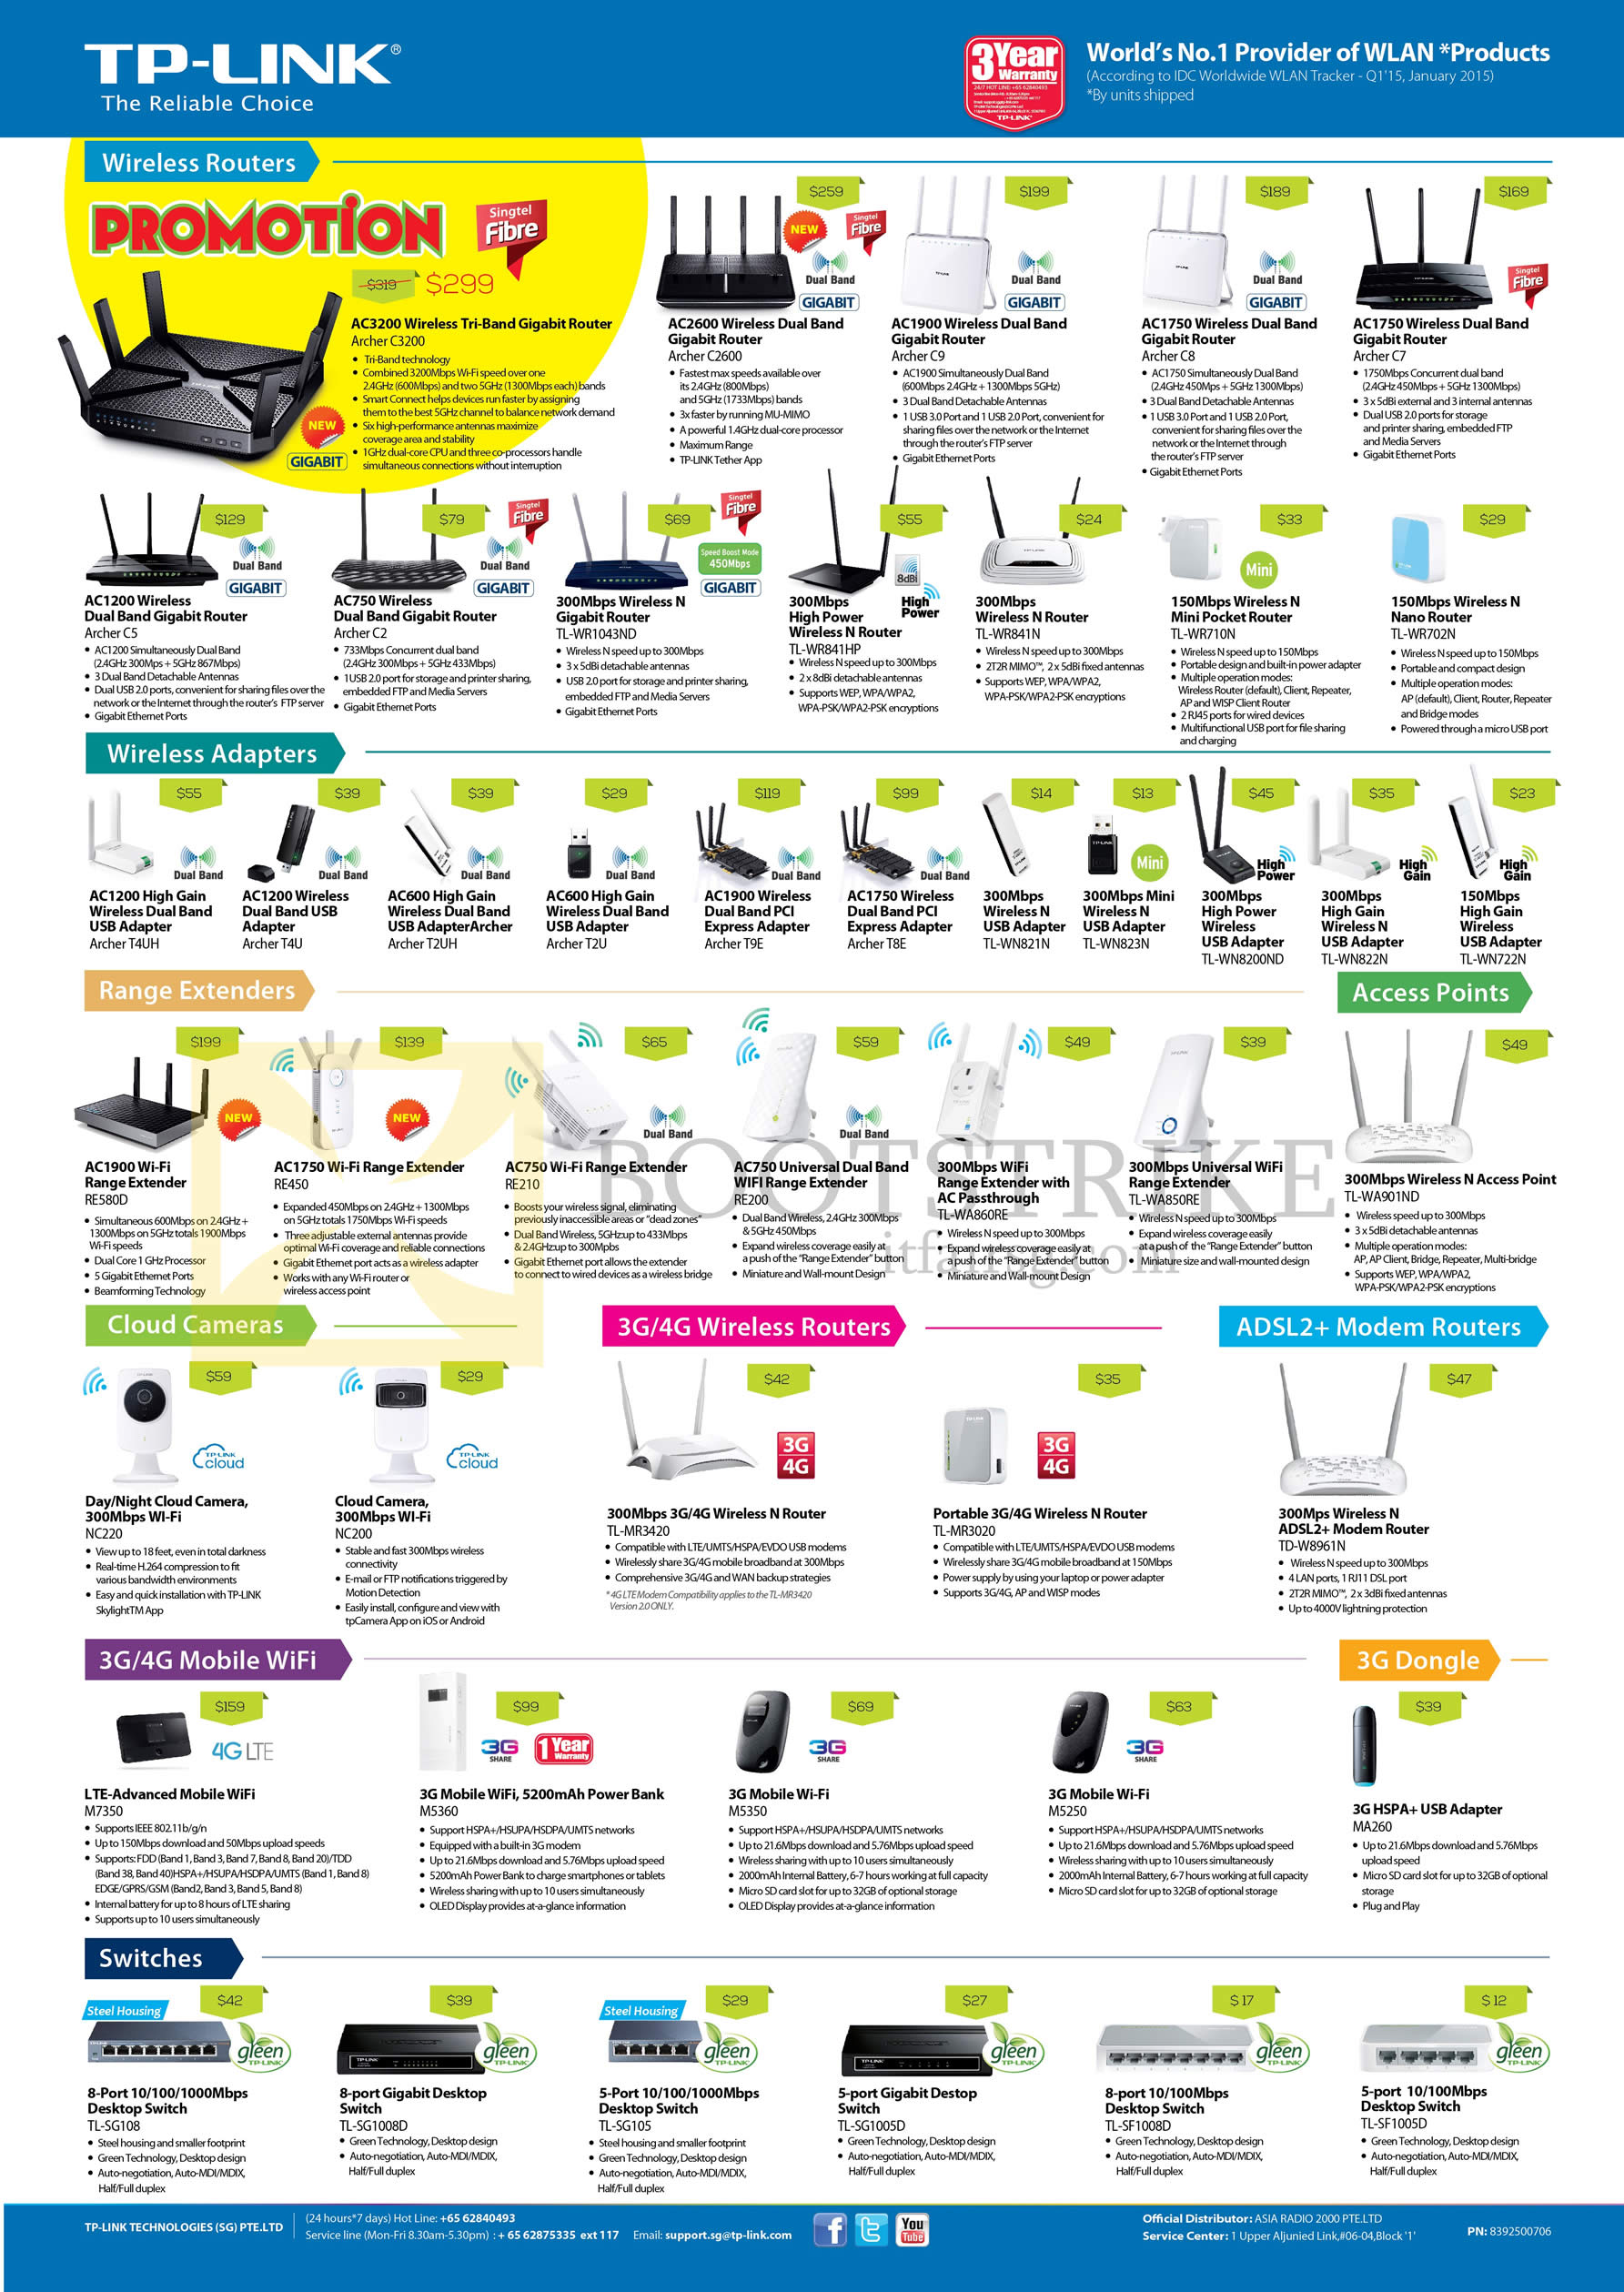 COMEX 2015 price list image brochure of Asia Radio TP-Link Networking Wireless Routers, USB Adapters, Range Extenders, Access Points, Cloud Cameras, Modem Routers, Mobile Wifi, Switches